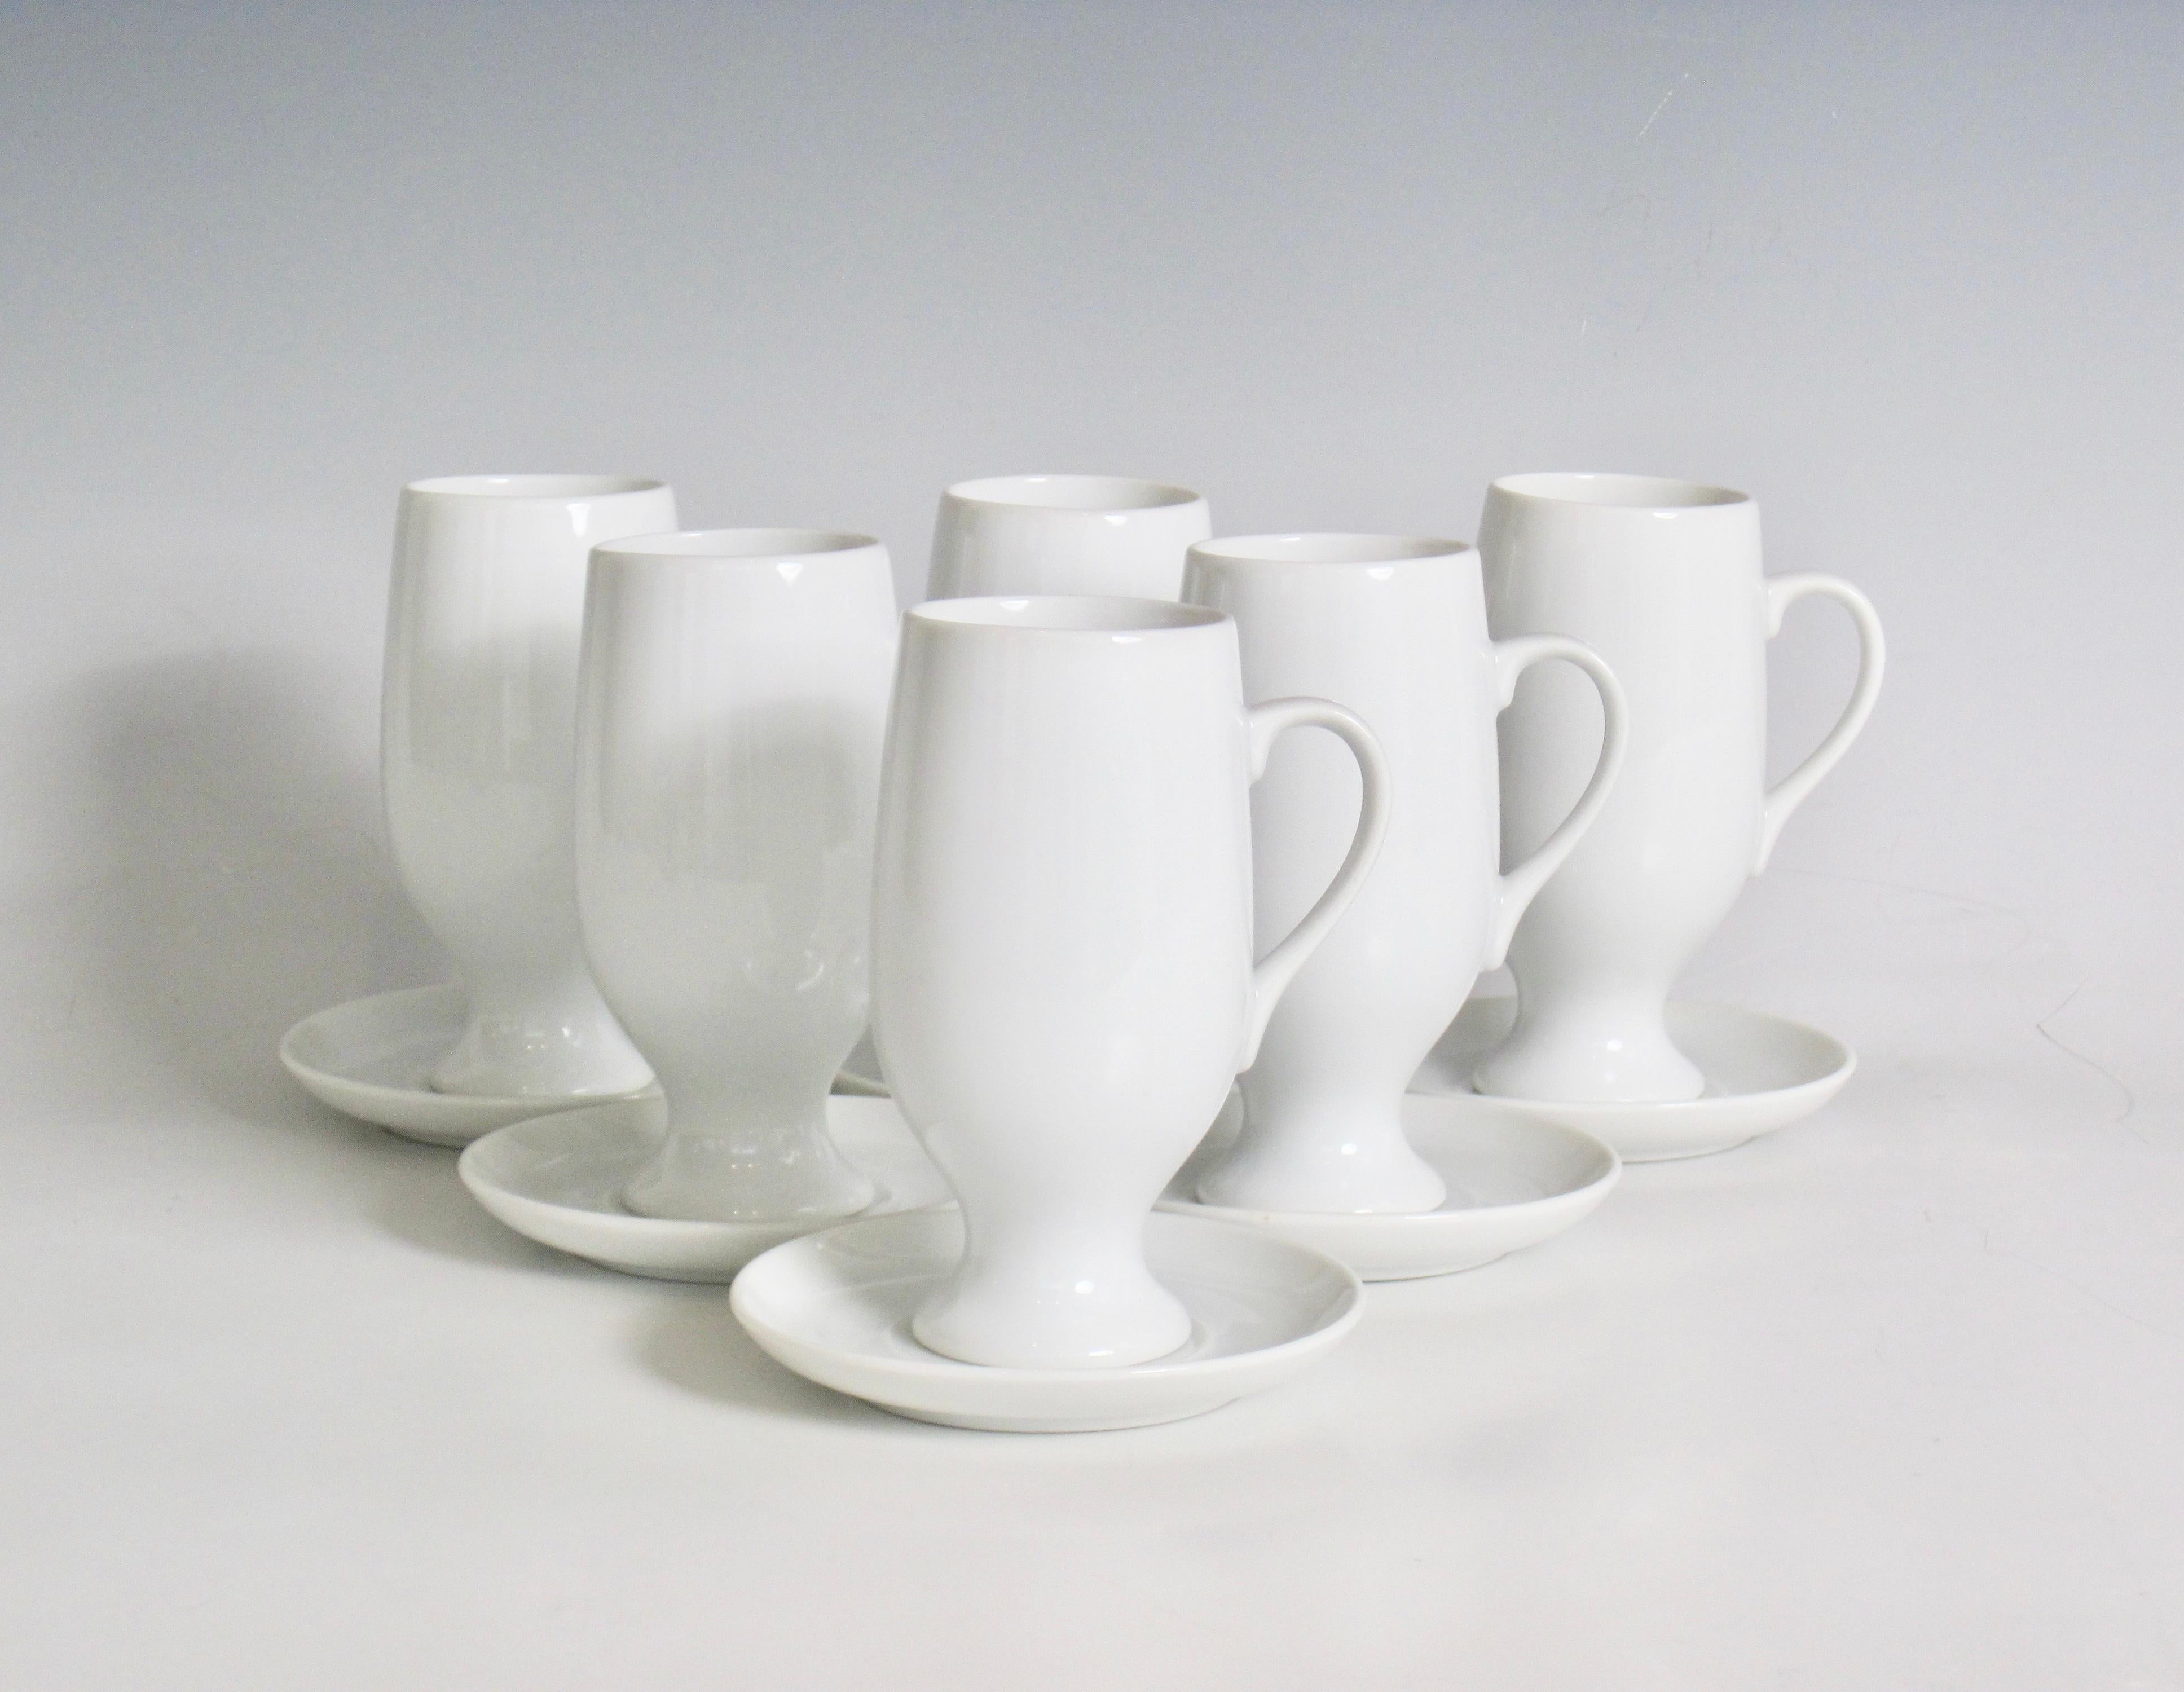 Set of six demitasse espresso cups and saucers in white porcelain made in Japan circa 1960s. Designed by Lagardo Tackett and produced by Schmid Kreglinger for the European and American markets. Good condition, no chips or cracks.